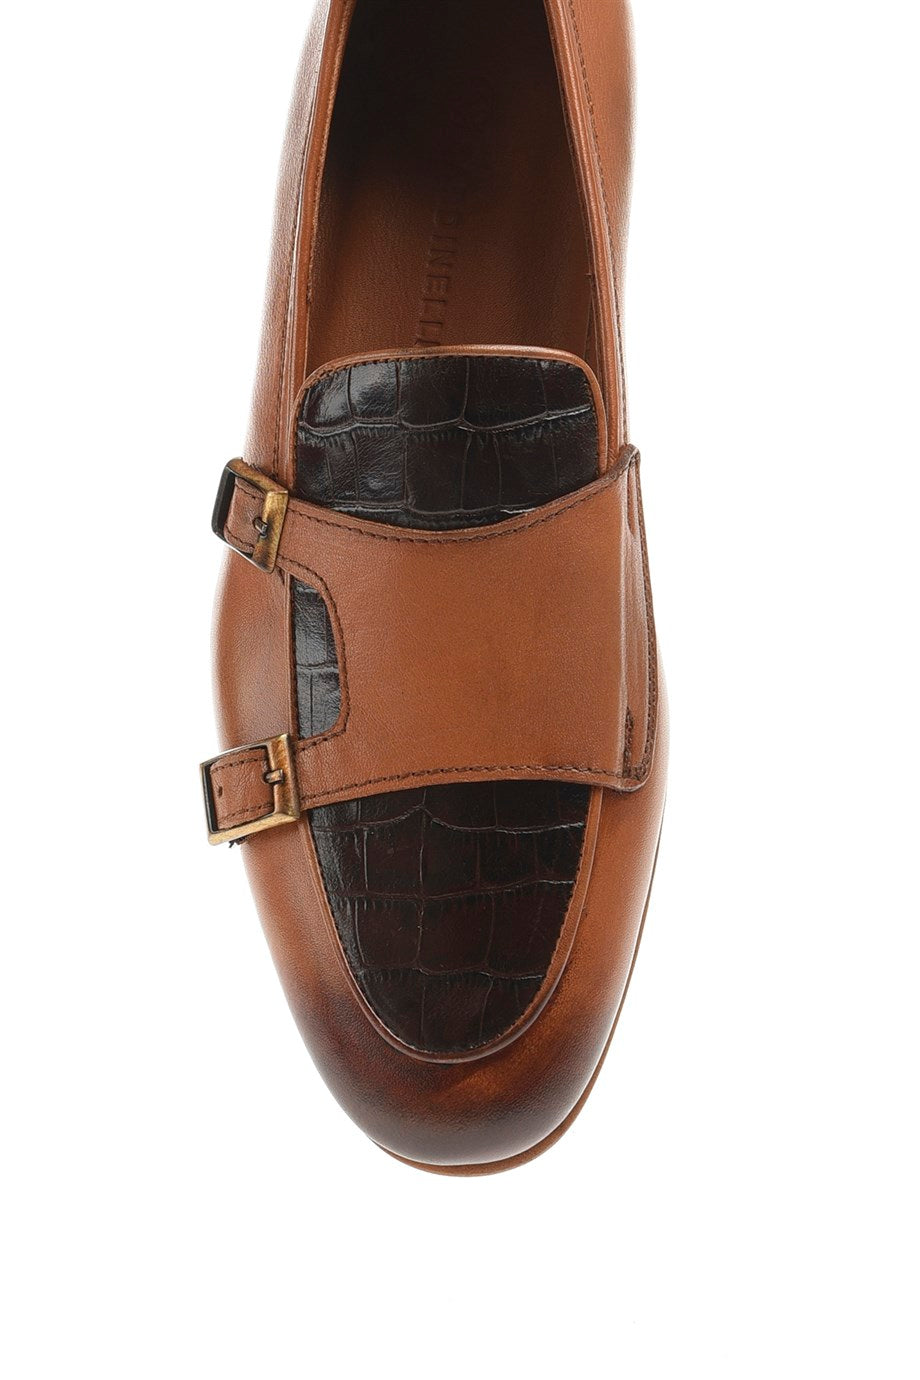 Neolite Base Loafers - MENSTYLEWITH